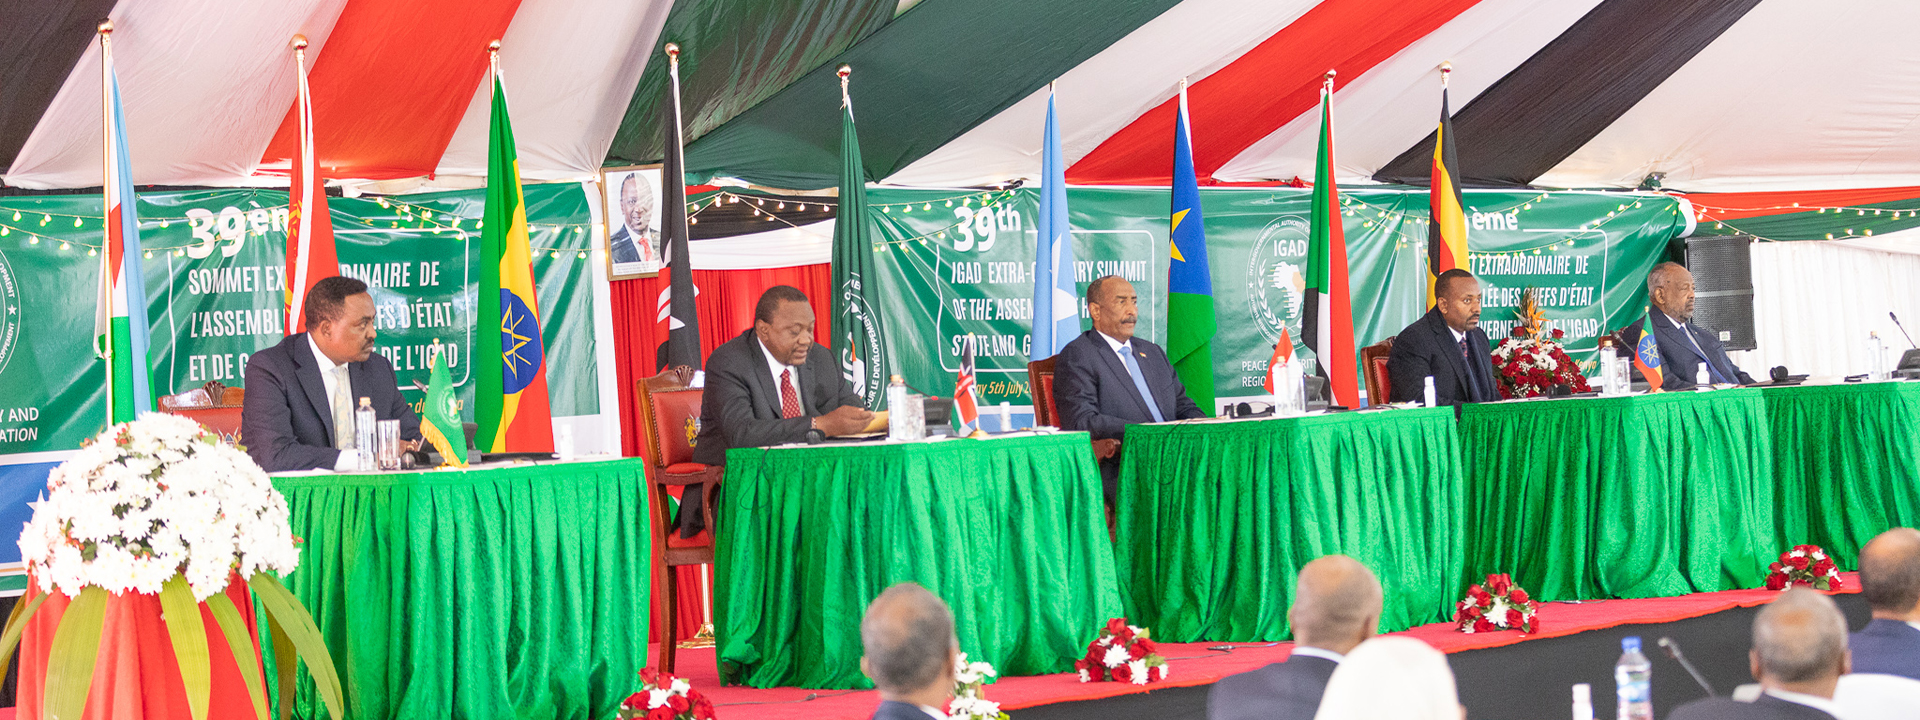 Official Remarks Dr. Workneh Gebeyehu, IGAD Executive Secretary on the 39th Extraordinary Assembly of IGAD Heads of State and Government Tuesday, 5th July 2022, Republic of Kenya